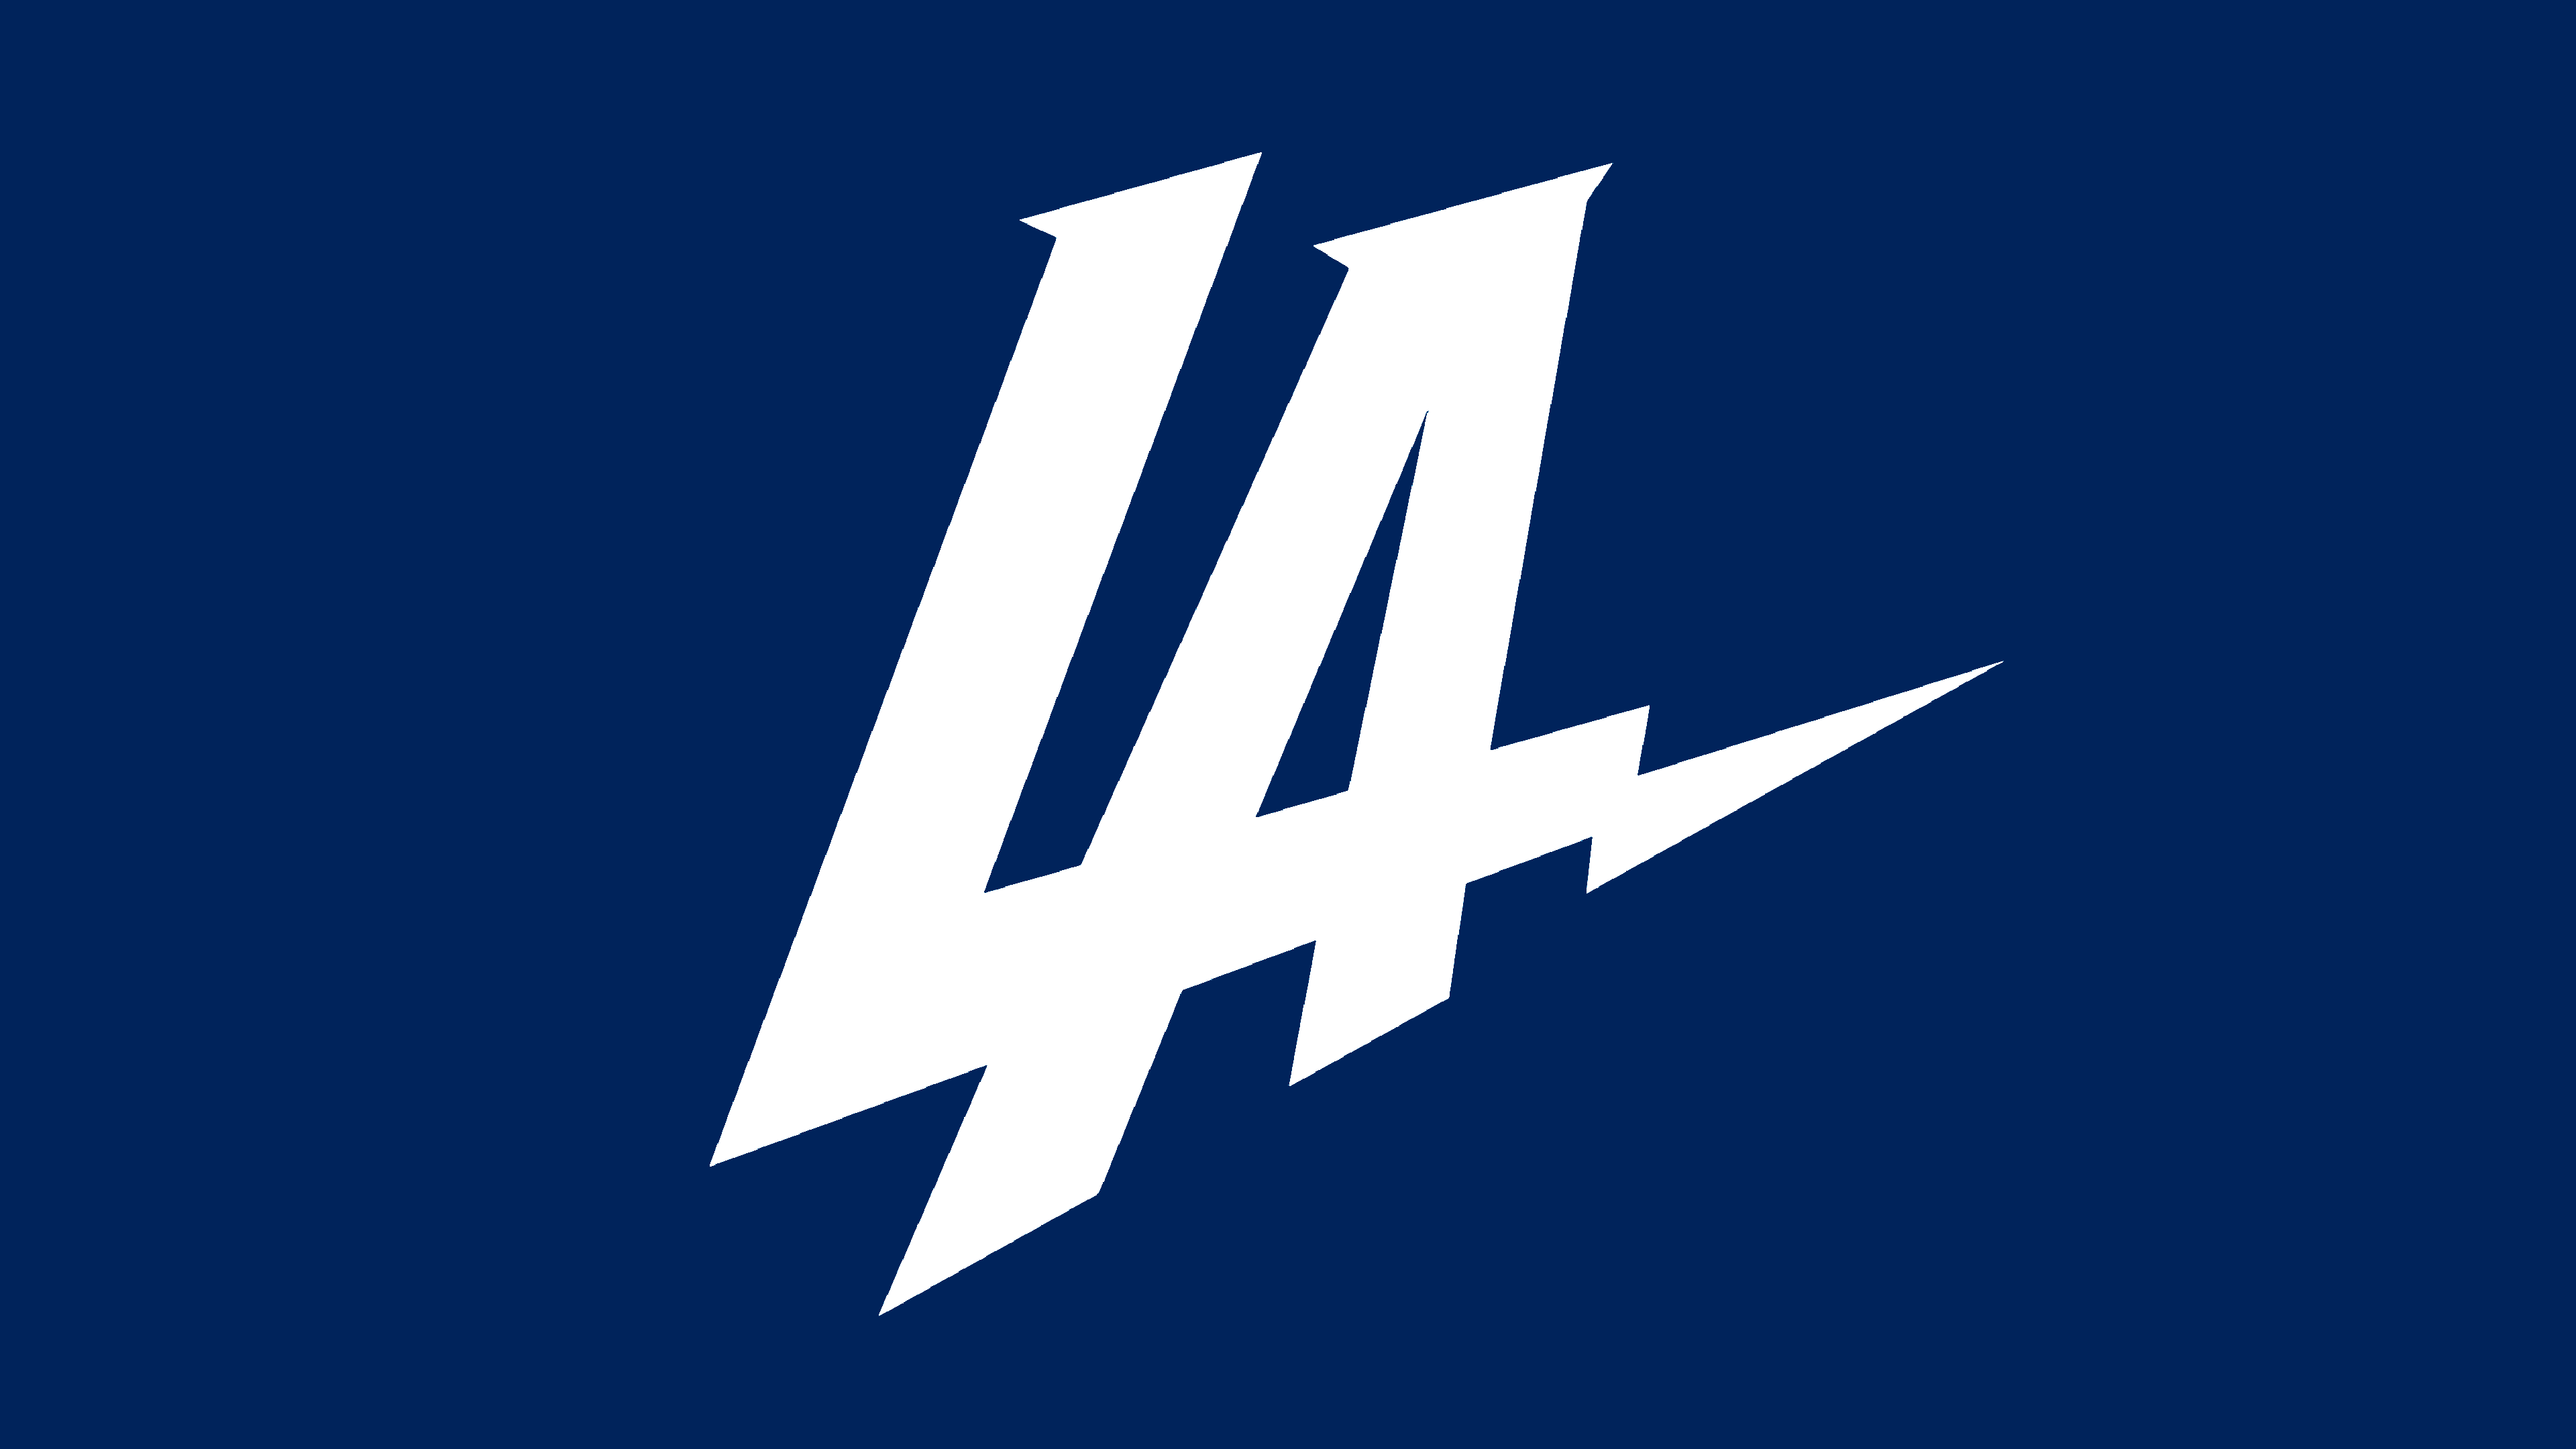 Los Angeles Chargers Team Color Scheme » Brand and Logo